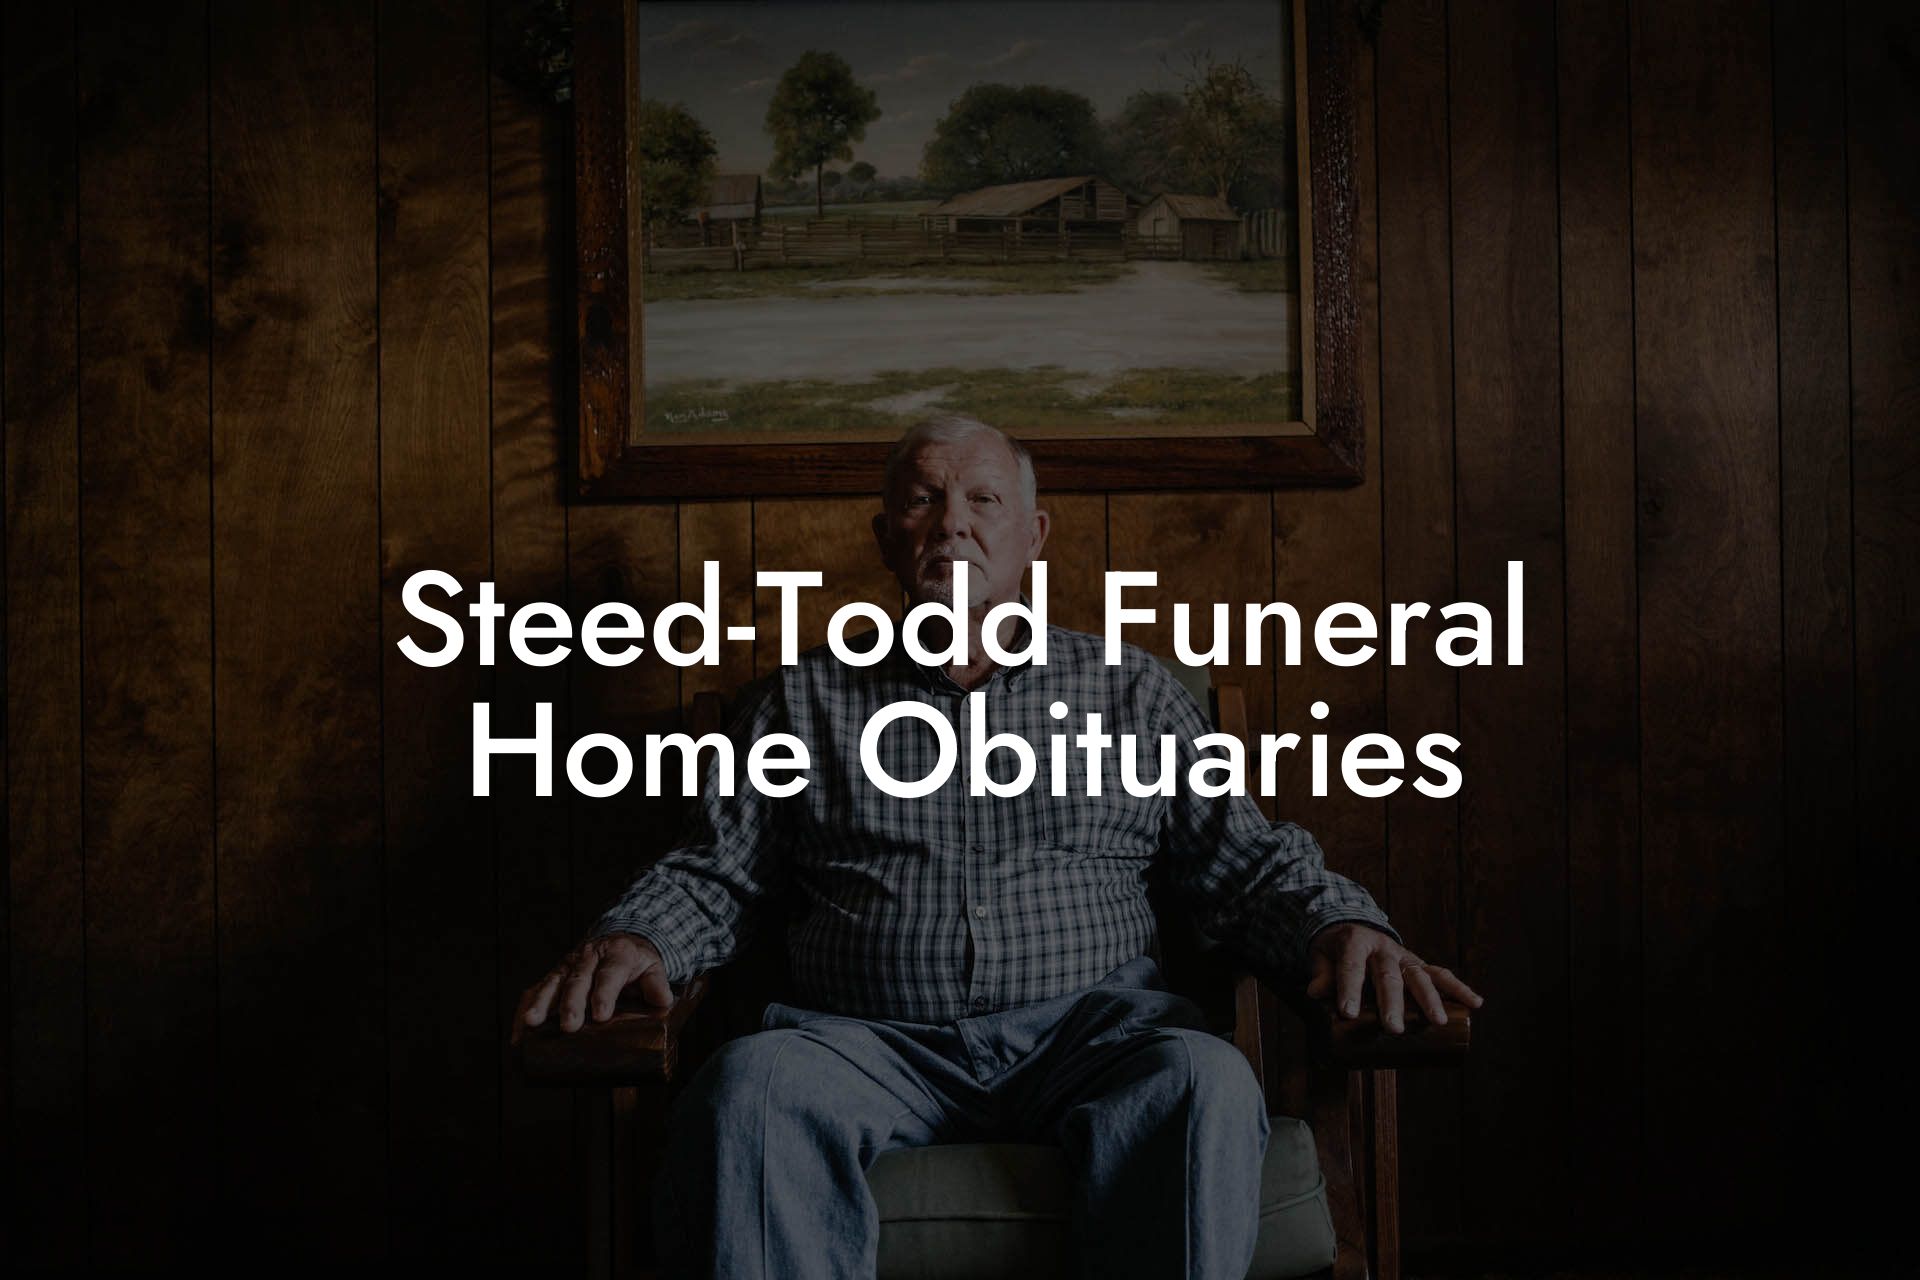 Steed-Todd Funeral Home Obituaries